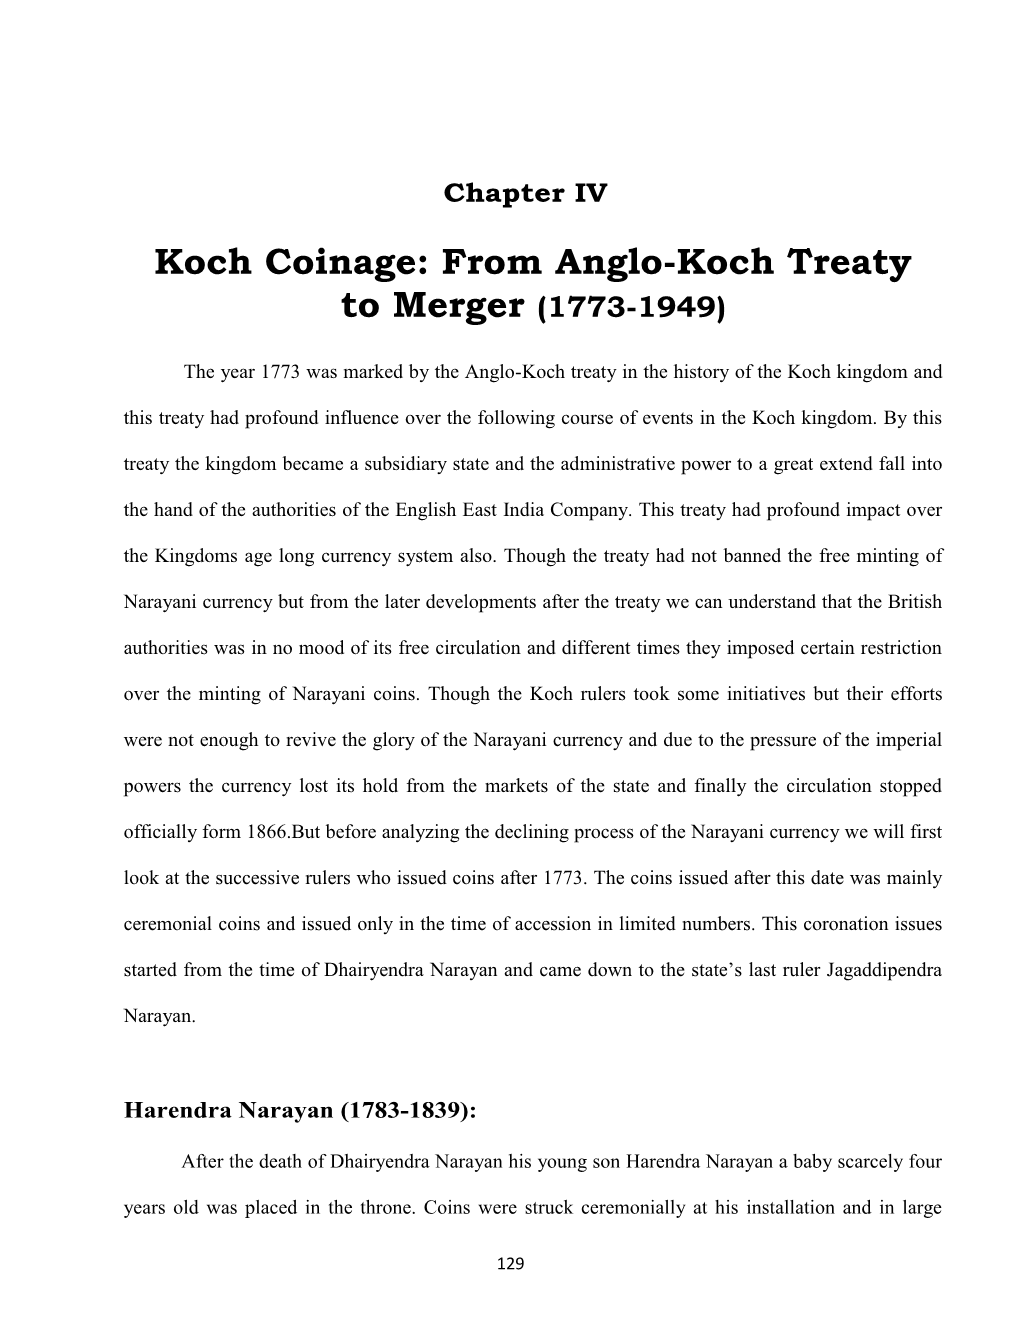 Koch Coinage: from Anglo-Koch Treaty to Merger (1773-1949)